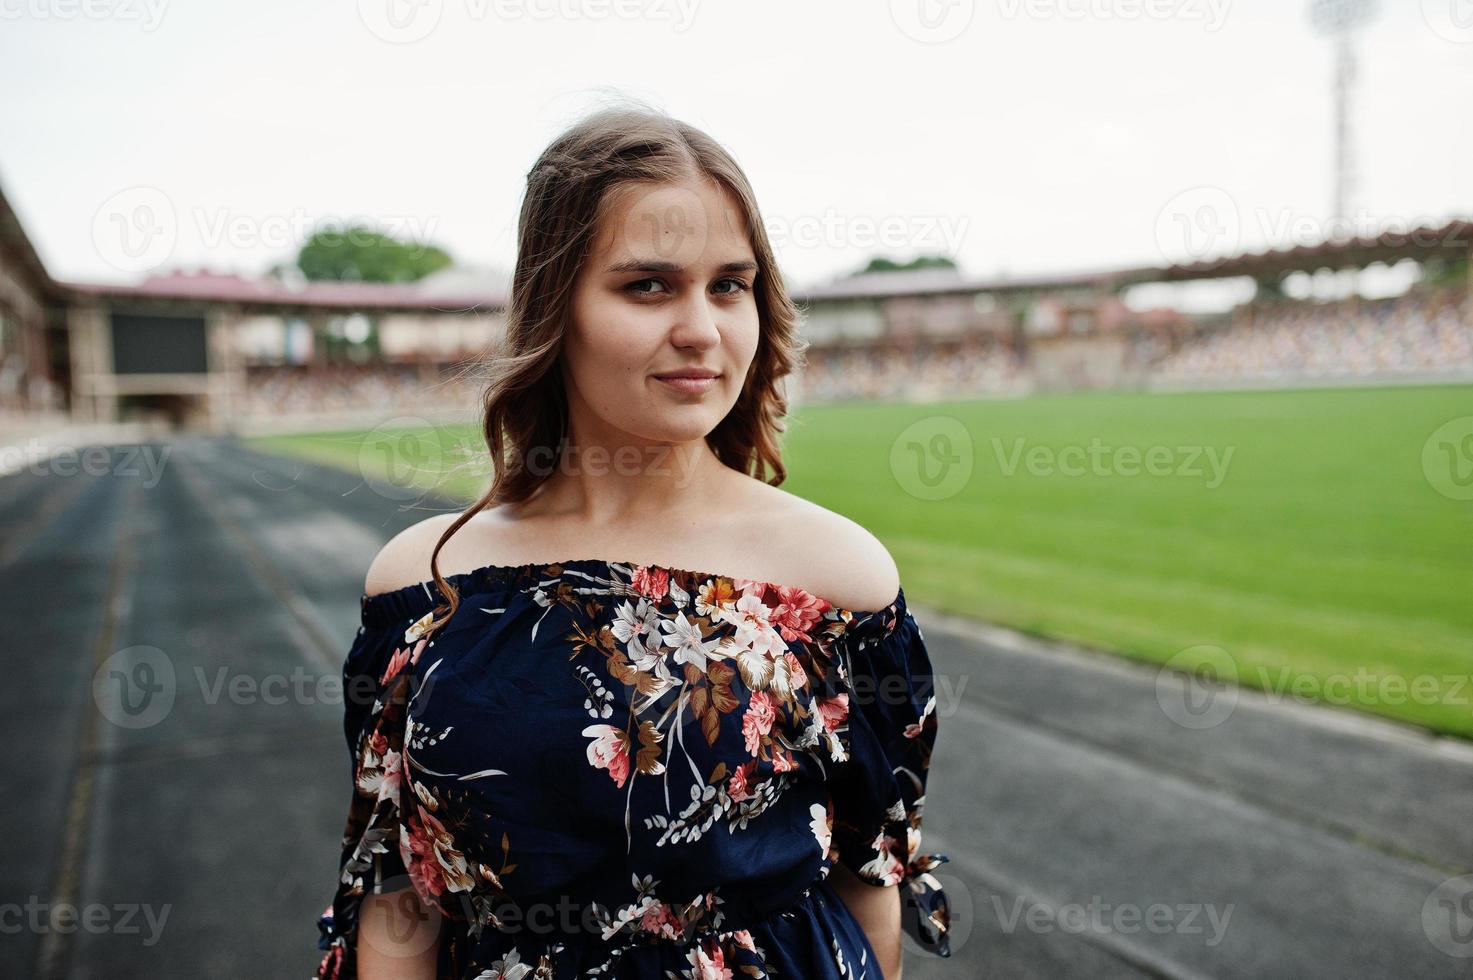 Portrait of a fabulous girl in dress and high heels on the track at the stadium. photo